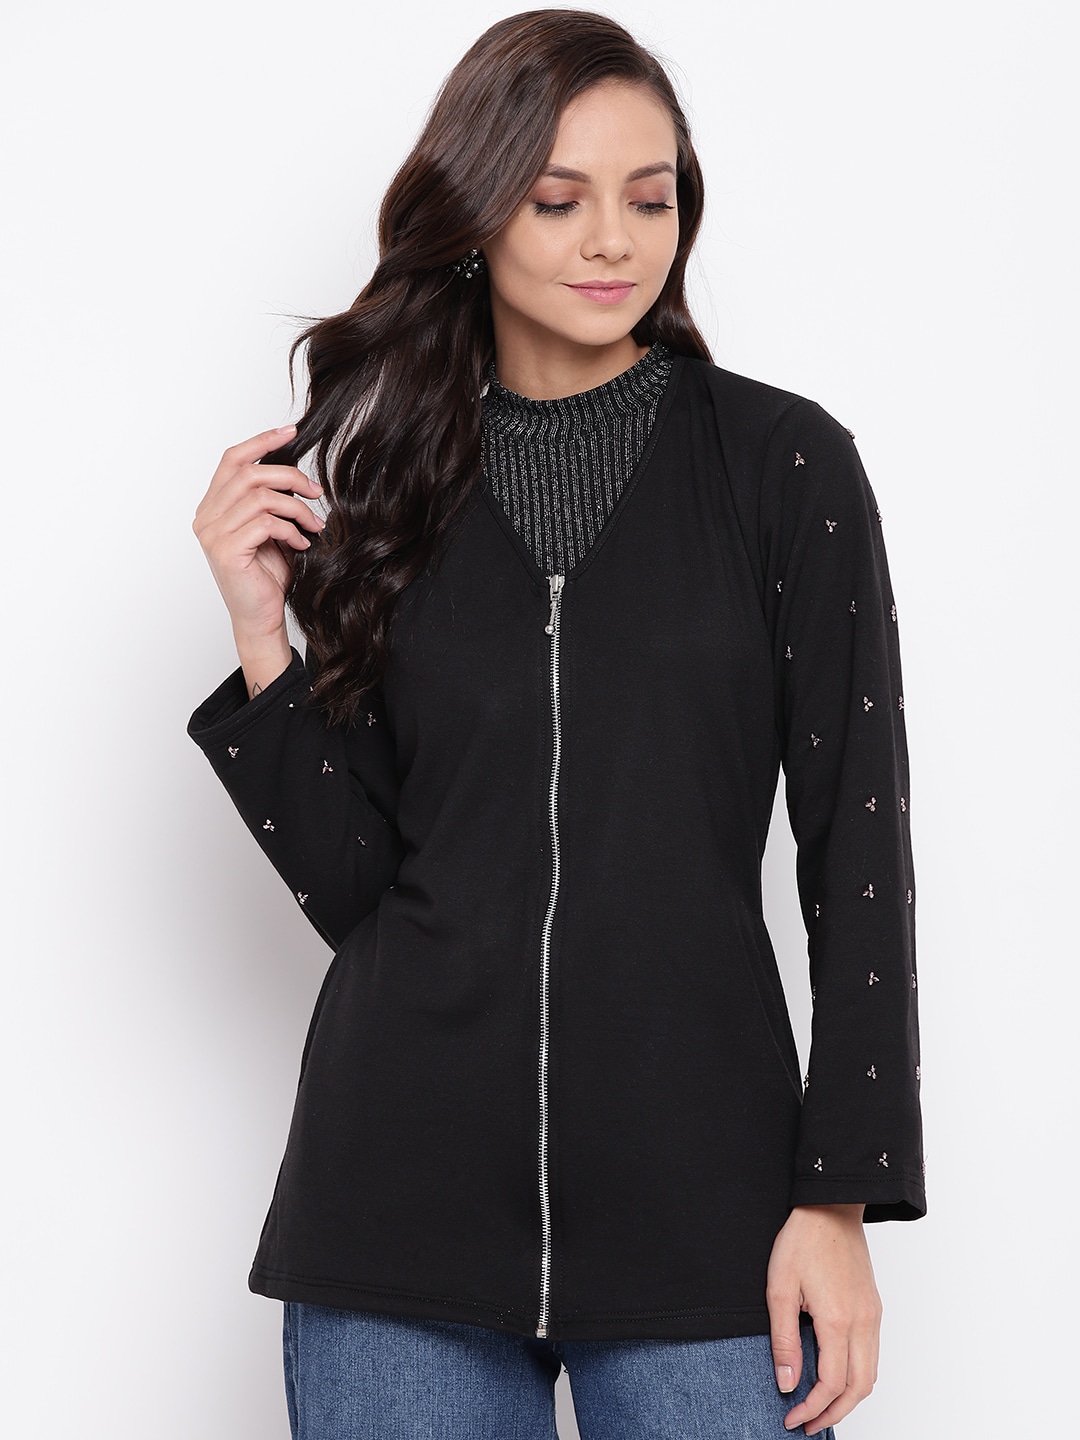 Belle Fille Women Black Solid Tailored Jacket Price in India